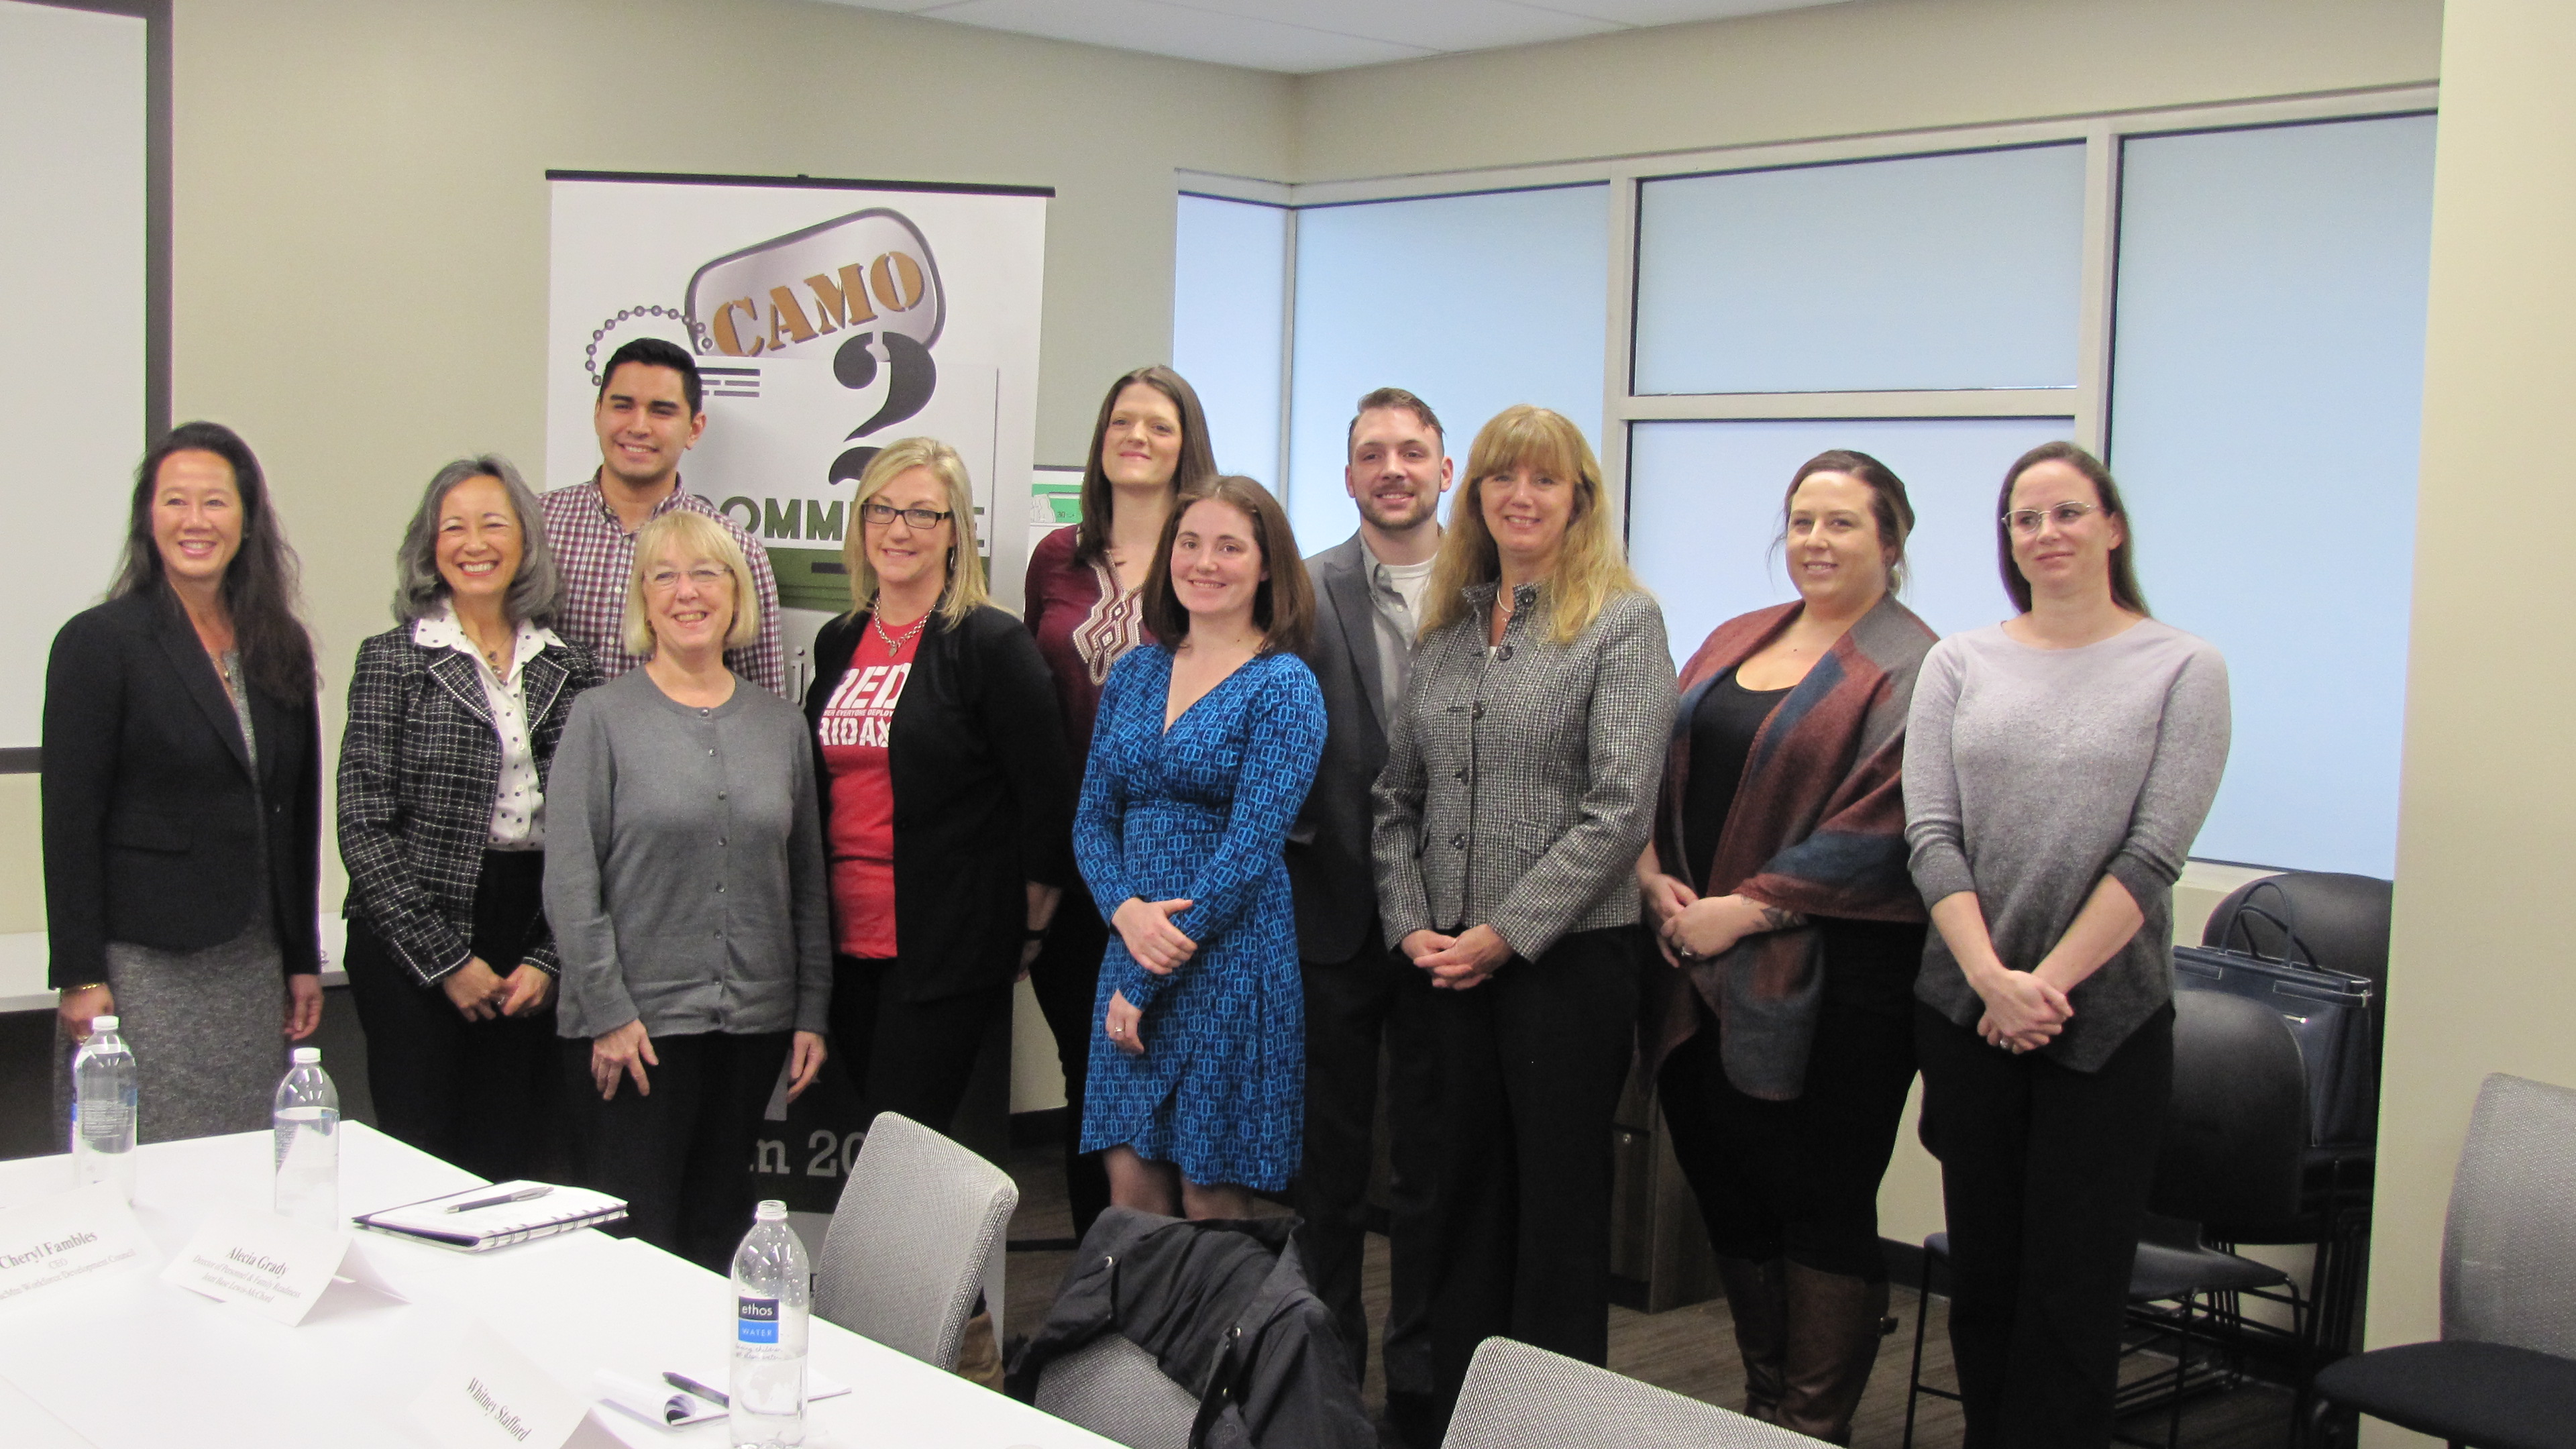 U.S. Sen. Patty Murray, WorkForce Central CEO Linda Nguyen and Pacific Mountain Workforce Development Council CEO Cheryl Fambles join several military spouses at a roundtable event in Lakewood, Wash., on Feb. 16, 2018.